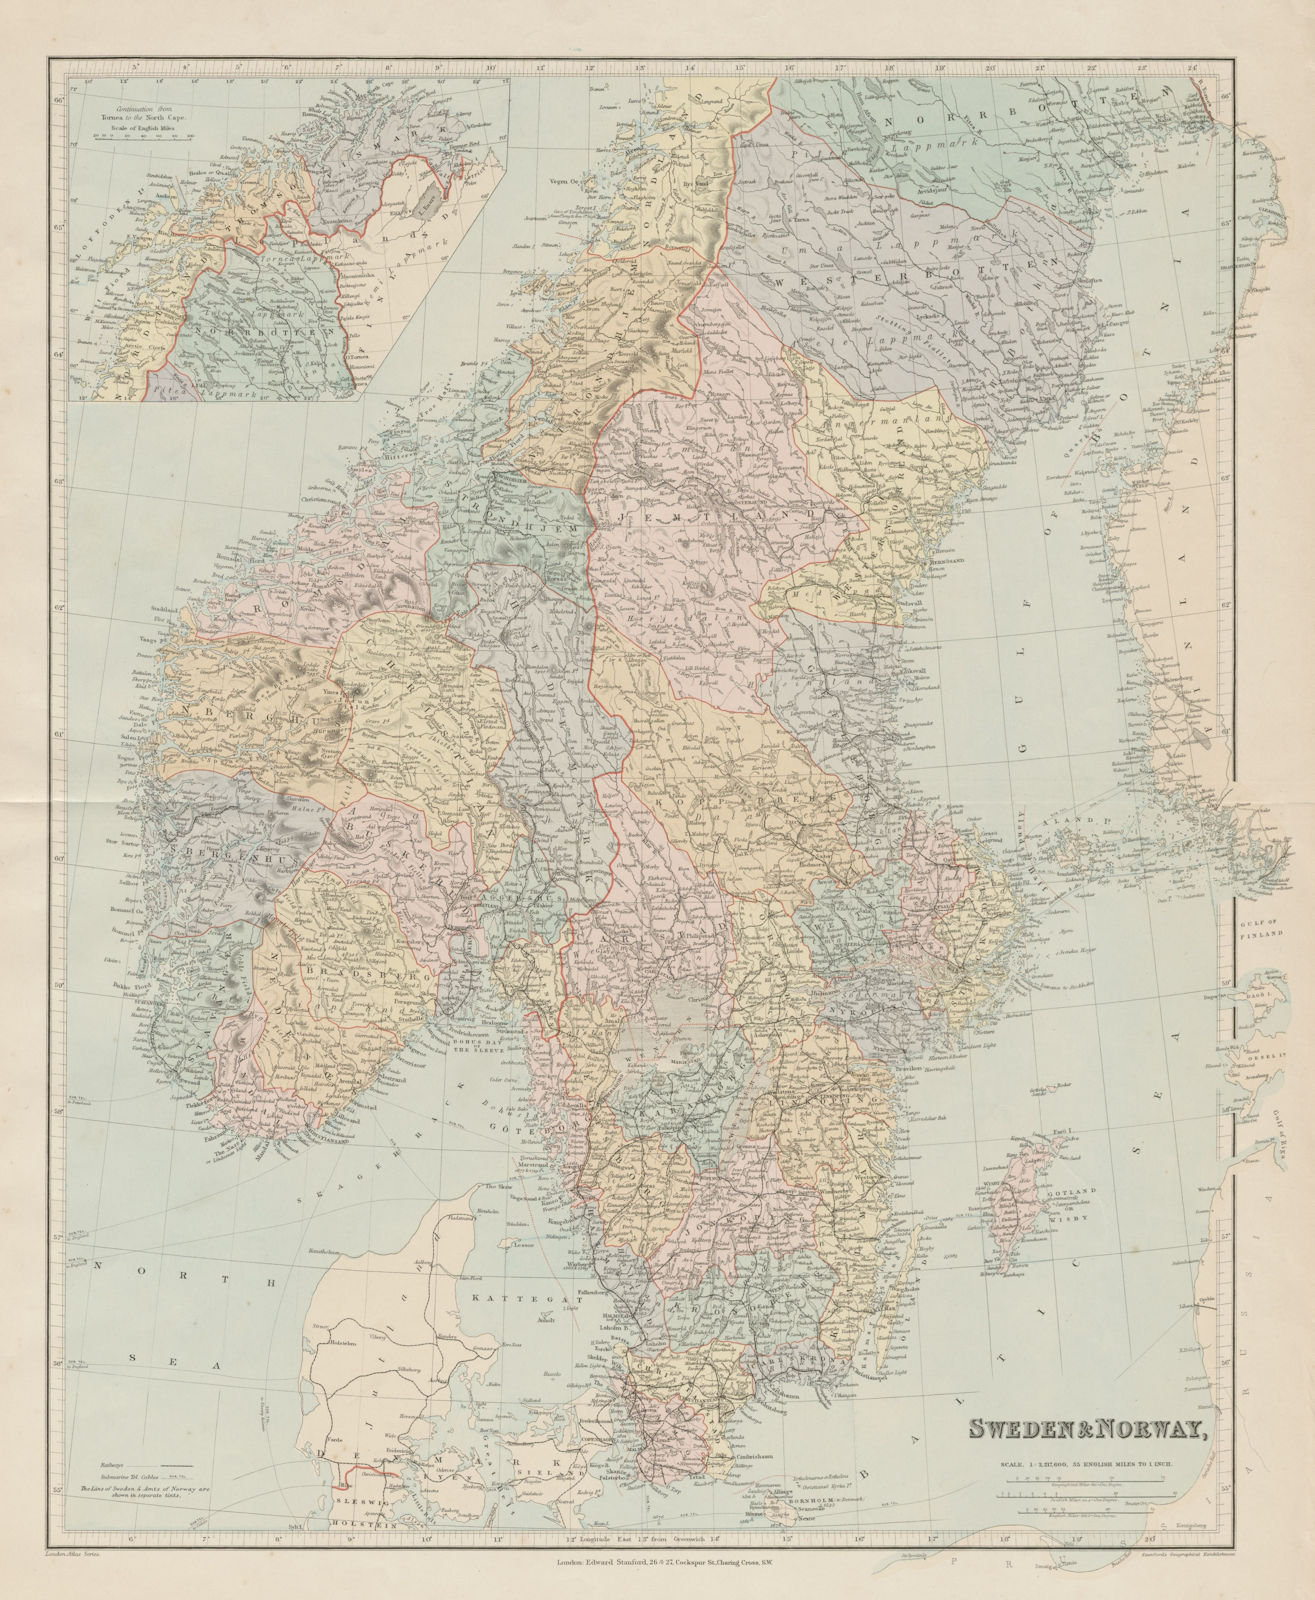 Scandinavia political divisions. Sweden Lims. Norway Amts. STANFORD 1894 map